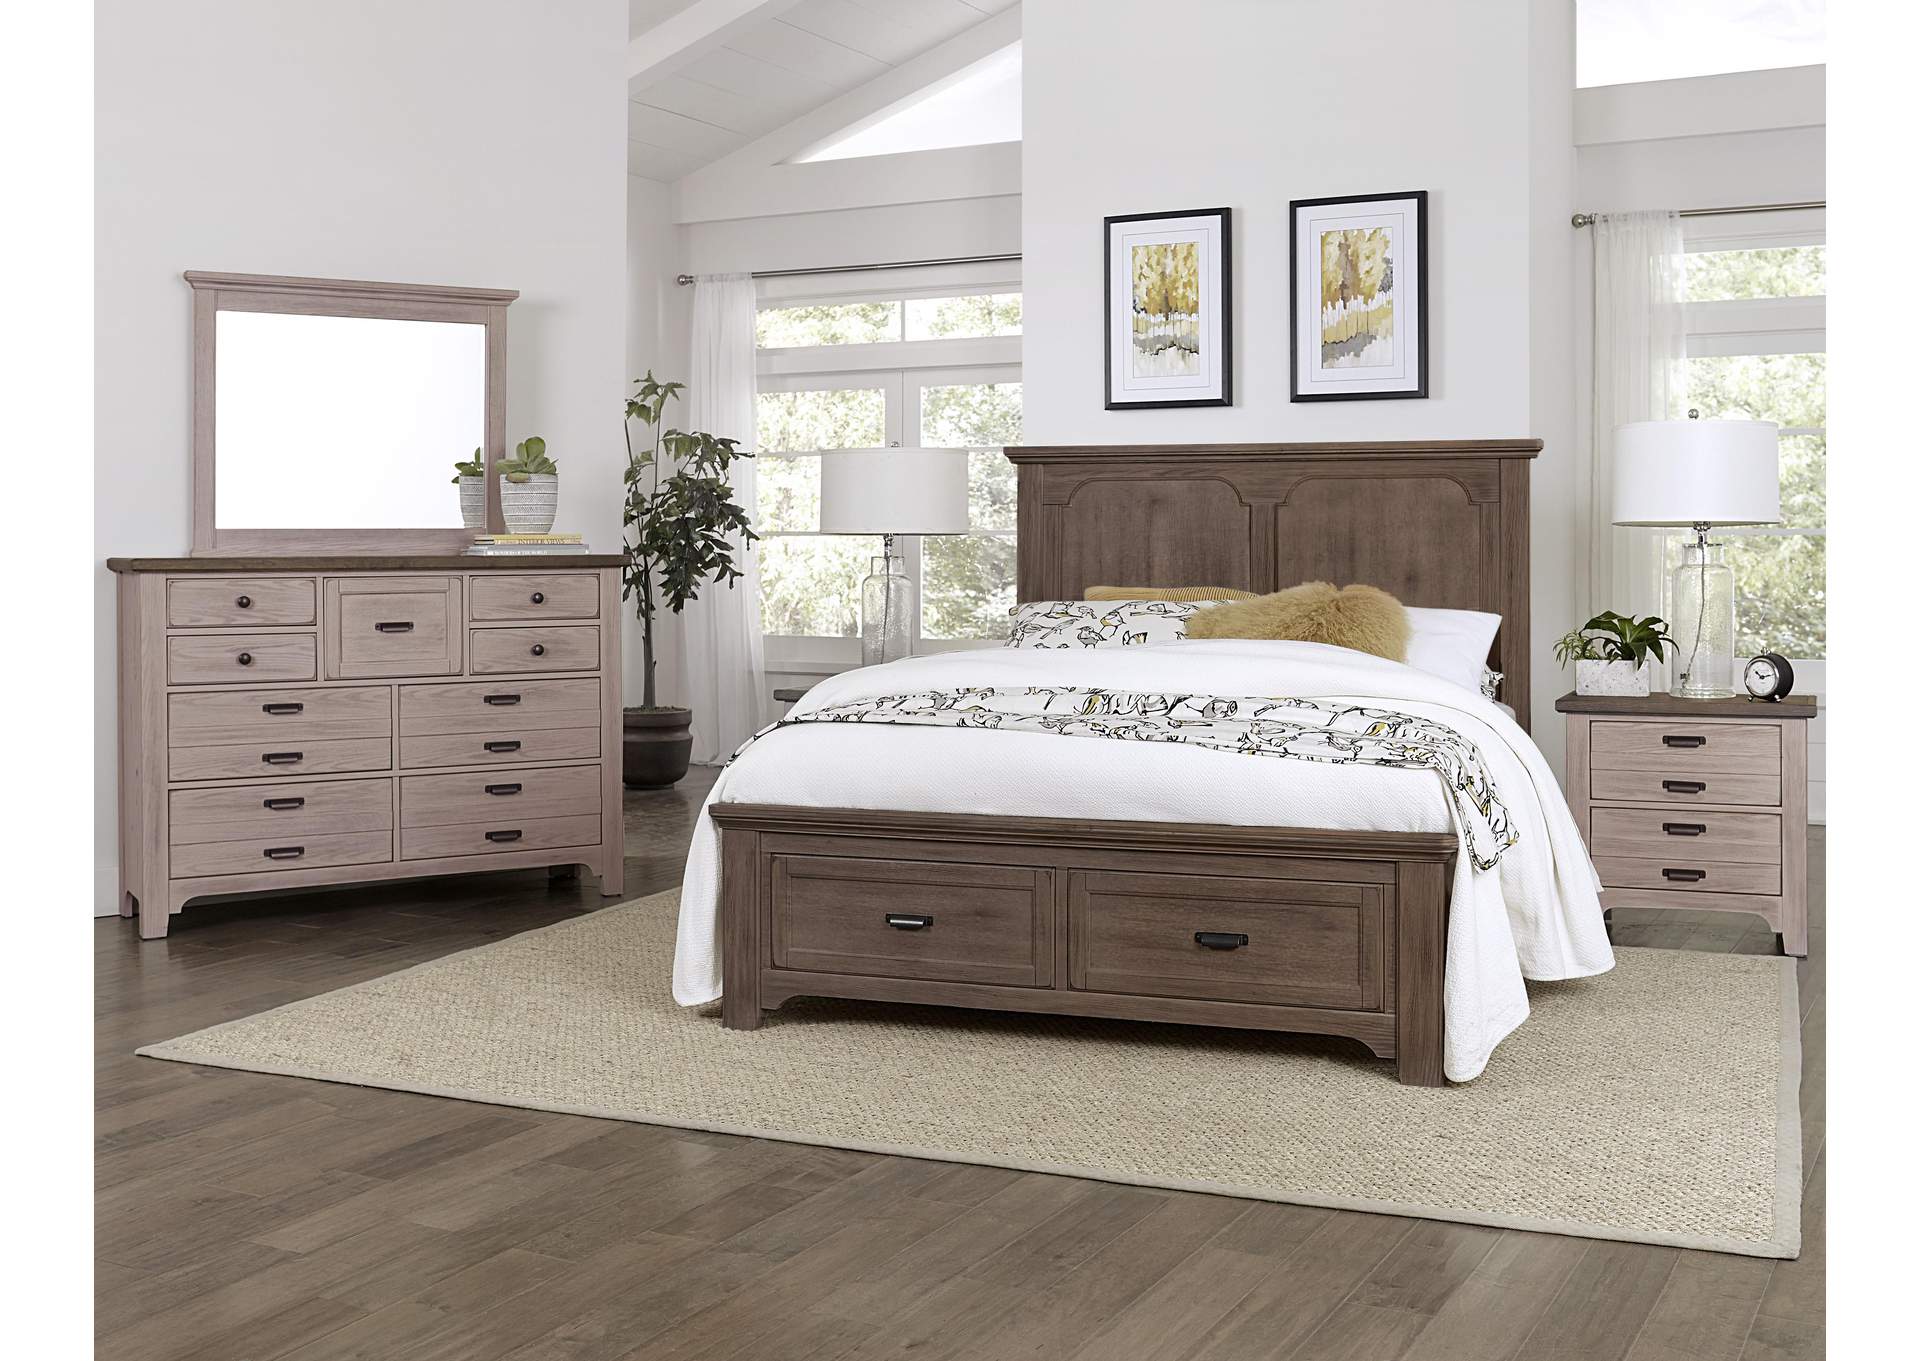 Bungalow Dover Grey with Folkstone Top Master Dresser - 9 Drawer,Vaughan-Bassett